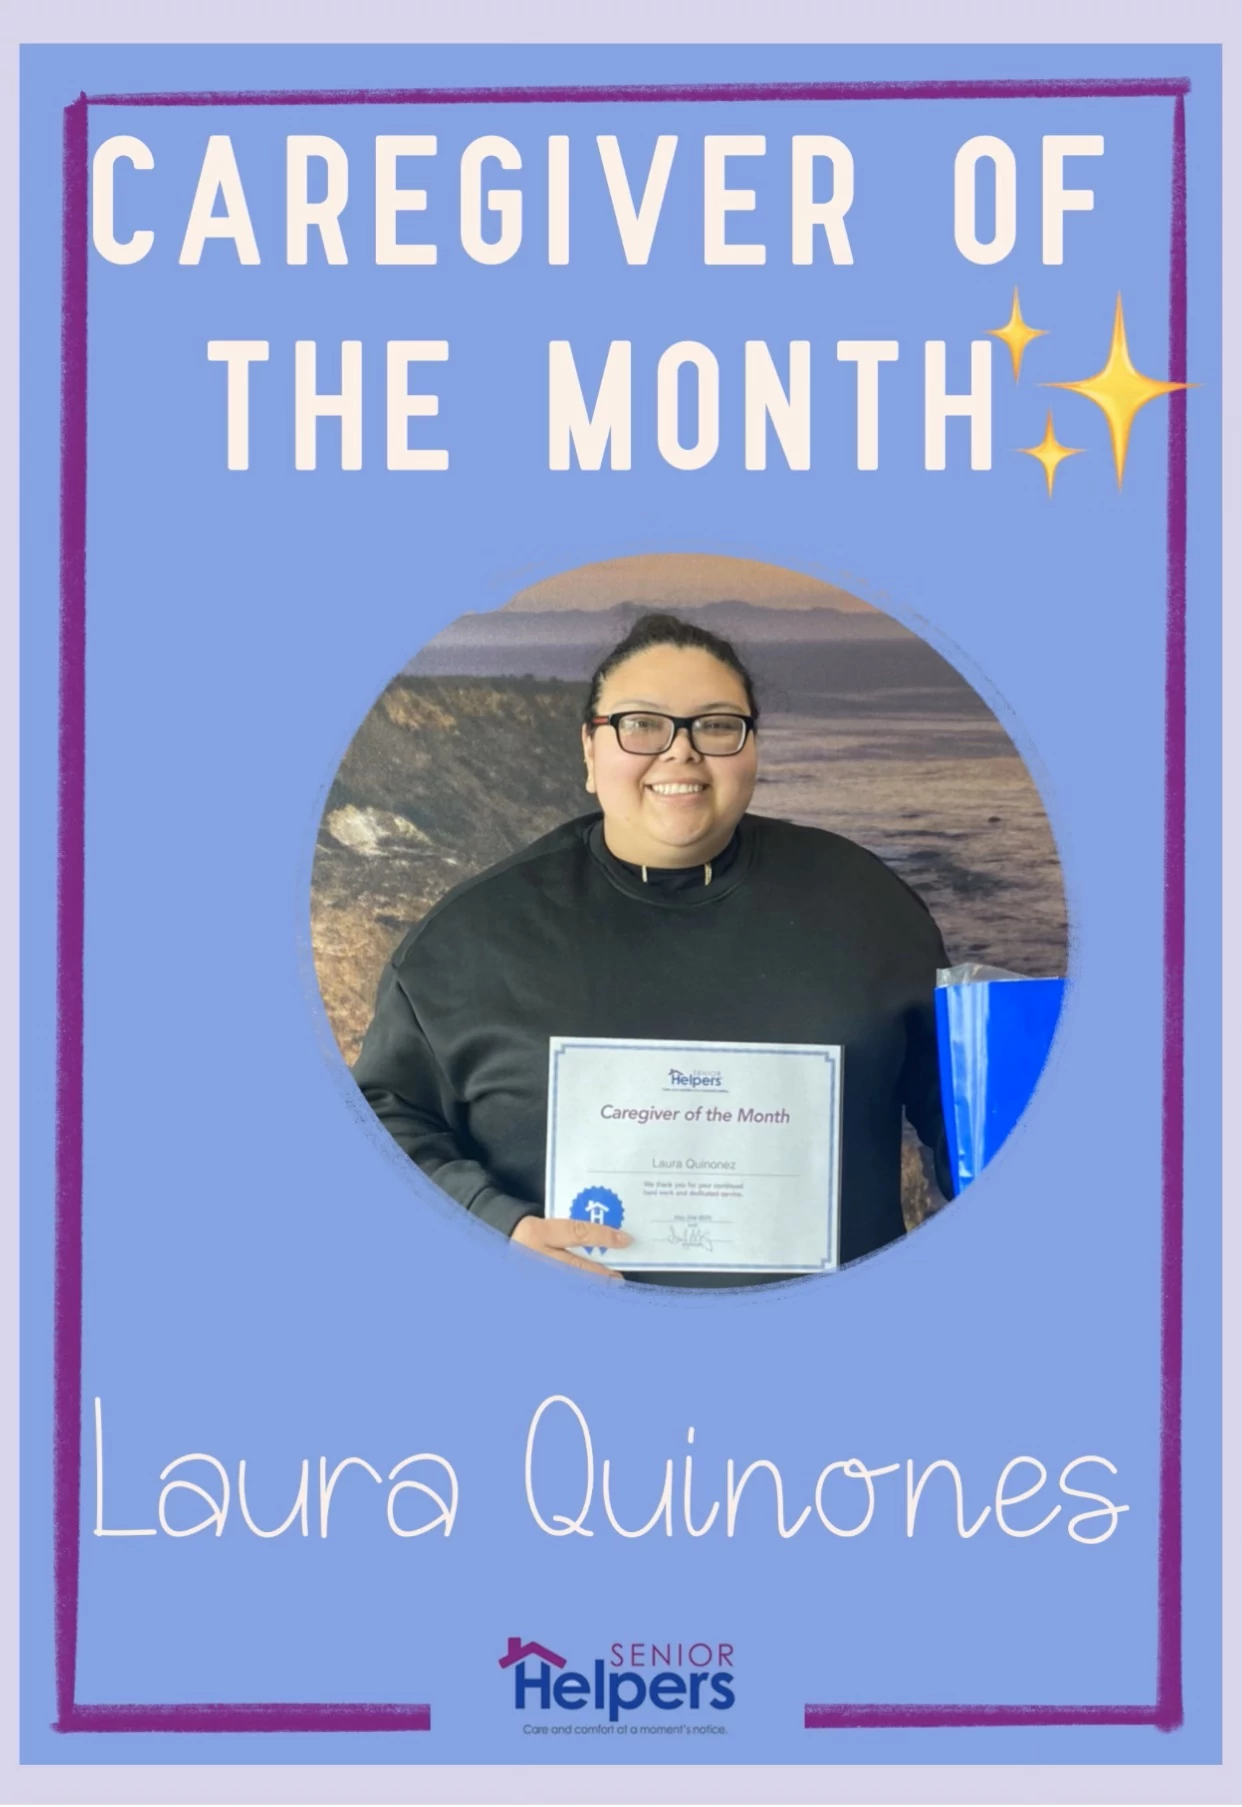 Laura has been a tremendous team player from the very beginning. Her dedication and work ethic are truly admirable traits. Thank you for always being there for your clients in Villa Park and Orange, CA. They love you!  Congratulation Laura, on being the Caregiver of the Month for May!